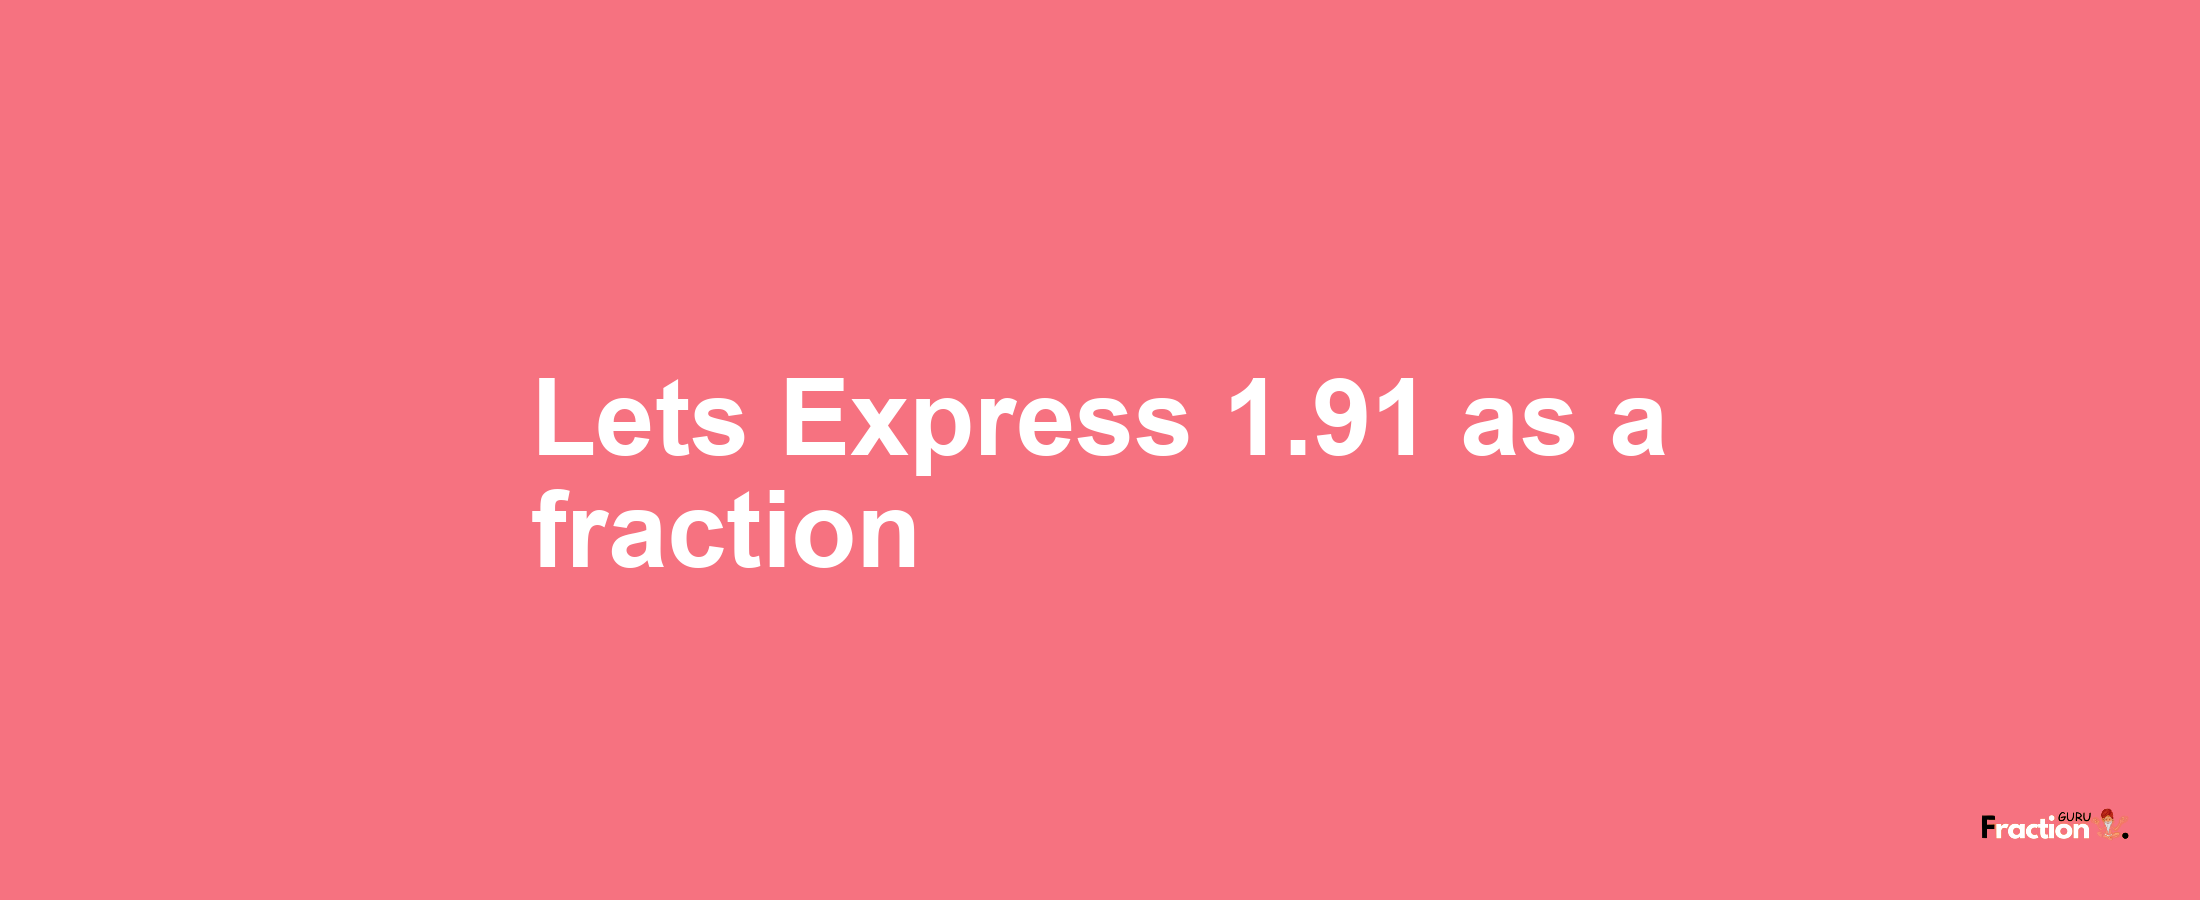 Lets Express 1.91 as afraction